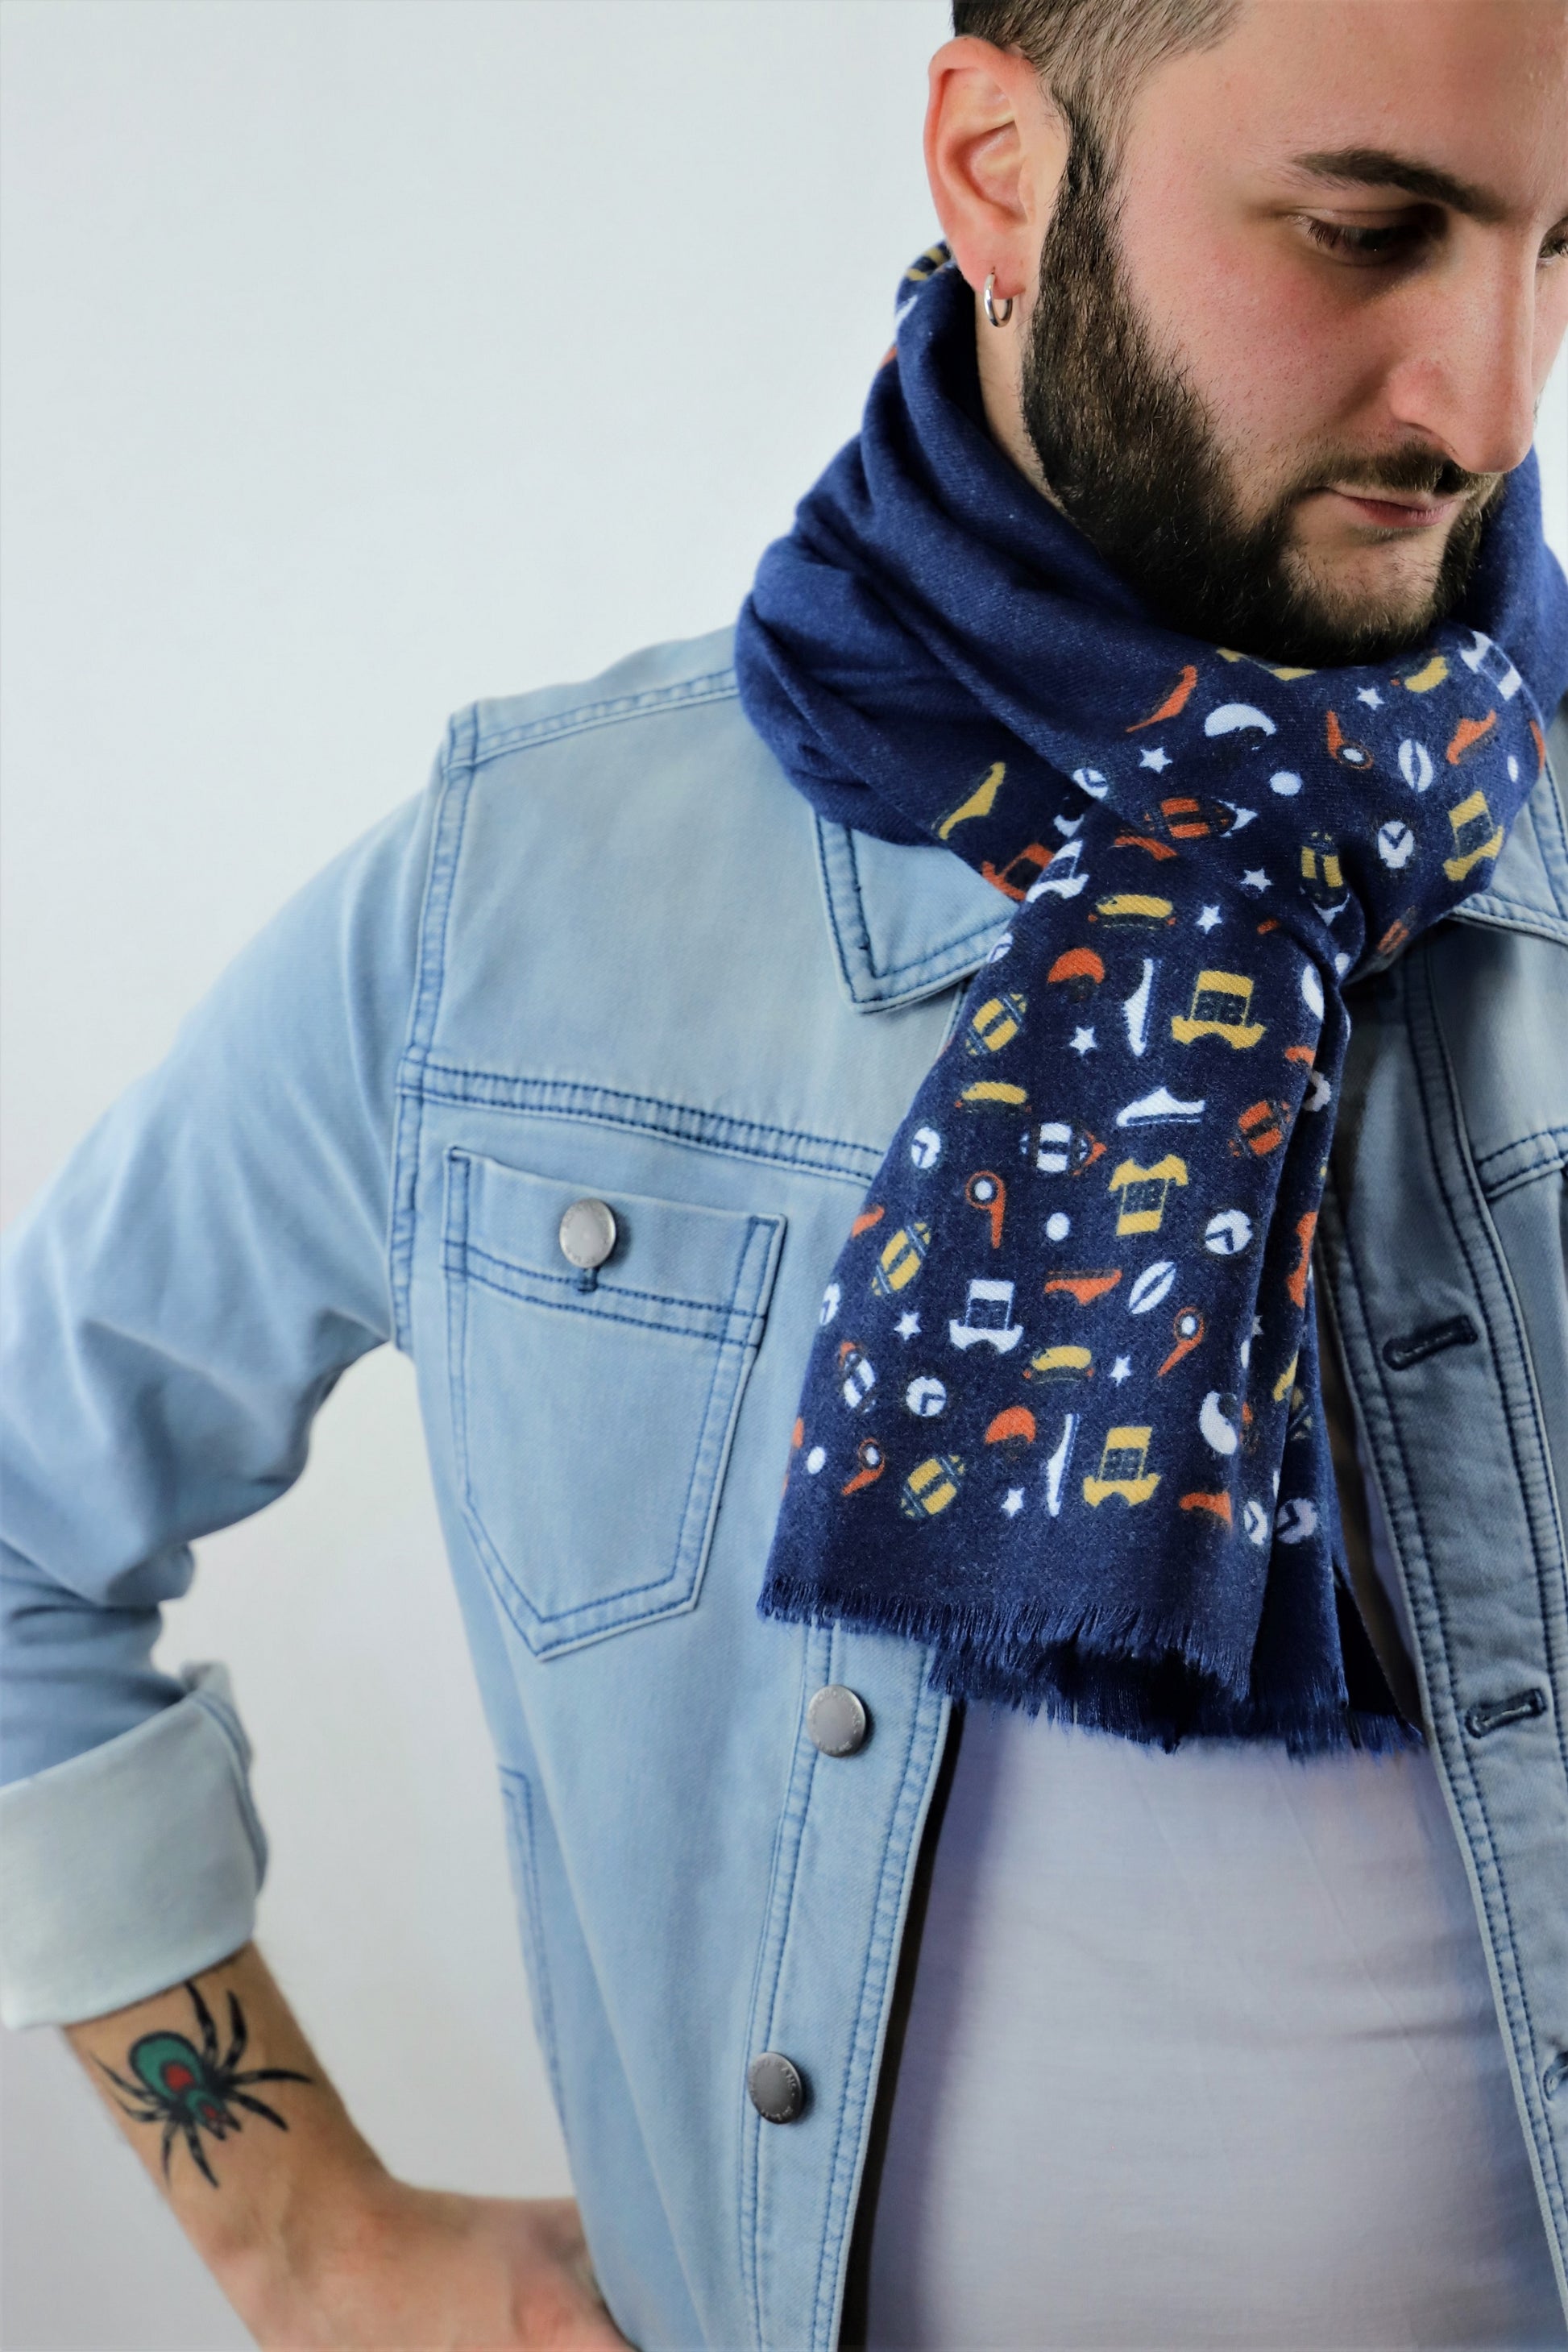 This is a warm and soft cotton scarf for men in navy blue color with unique patterns of rugby elements made from a special cotton blend that gives you a wonderful cashmere-like feeling without hurting animals. This is a completely vegan and cruelty free scarf certified by PETA and a perfect gift idea for both men.